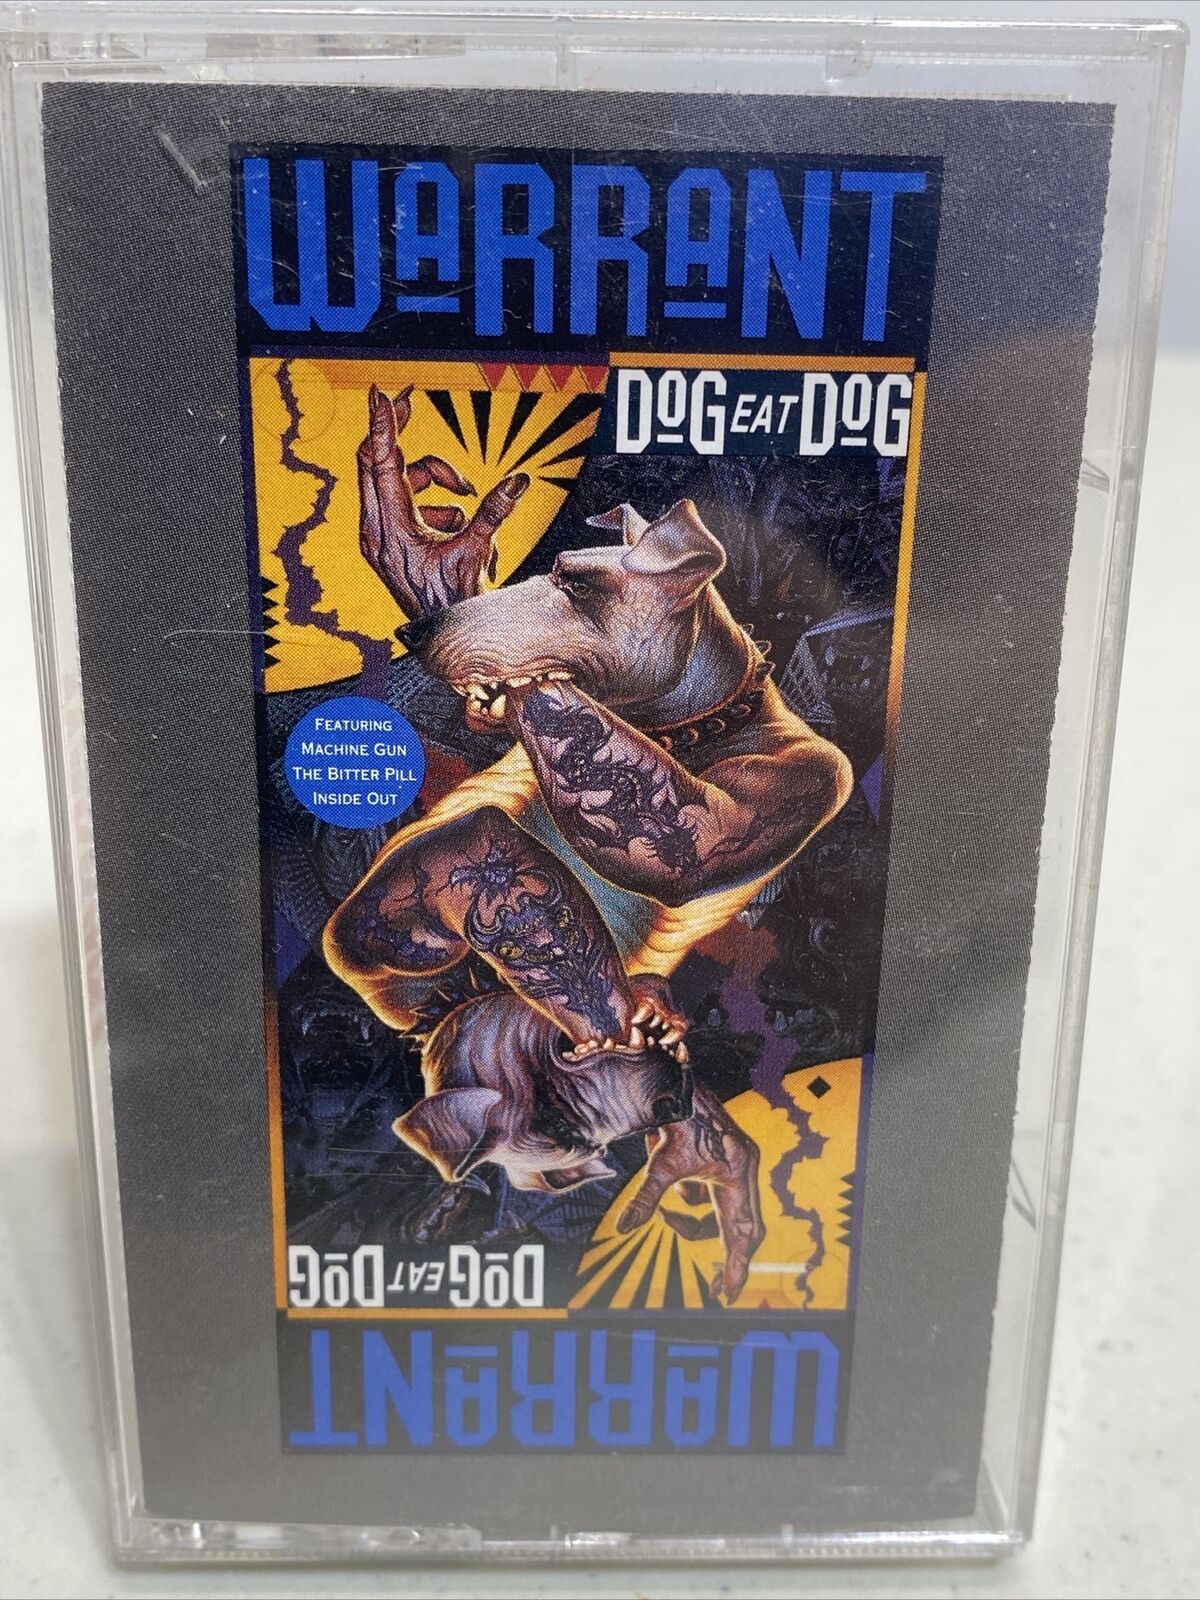 Dog Eat Dog by Warrant Cassette 1992, Columbia Sony CT52584